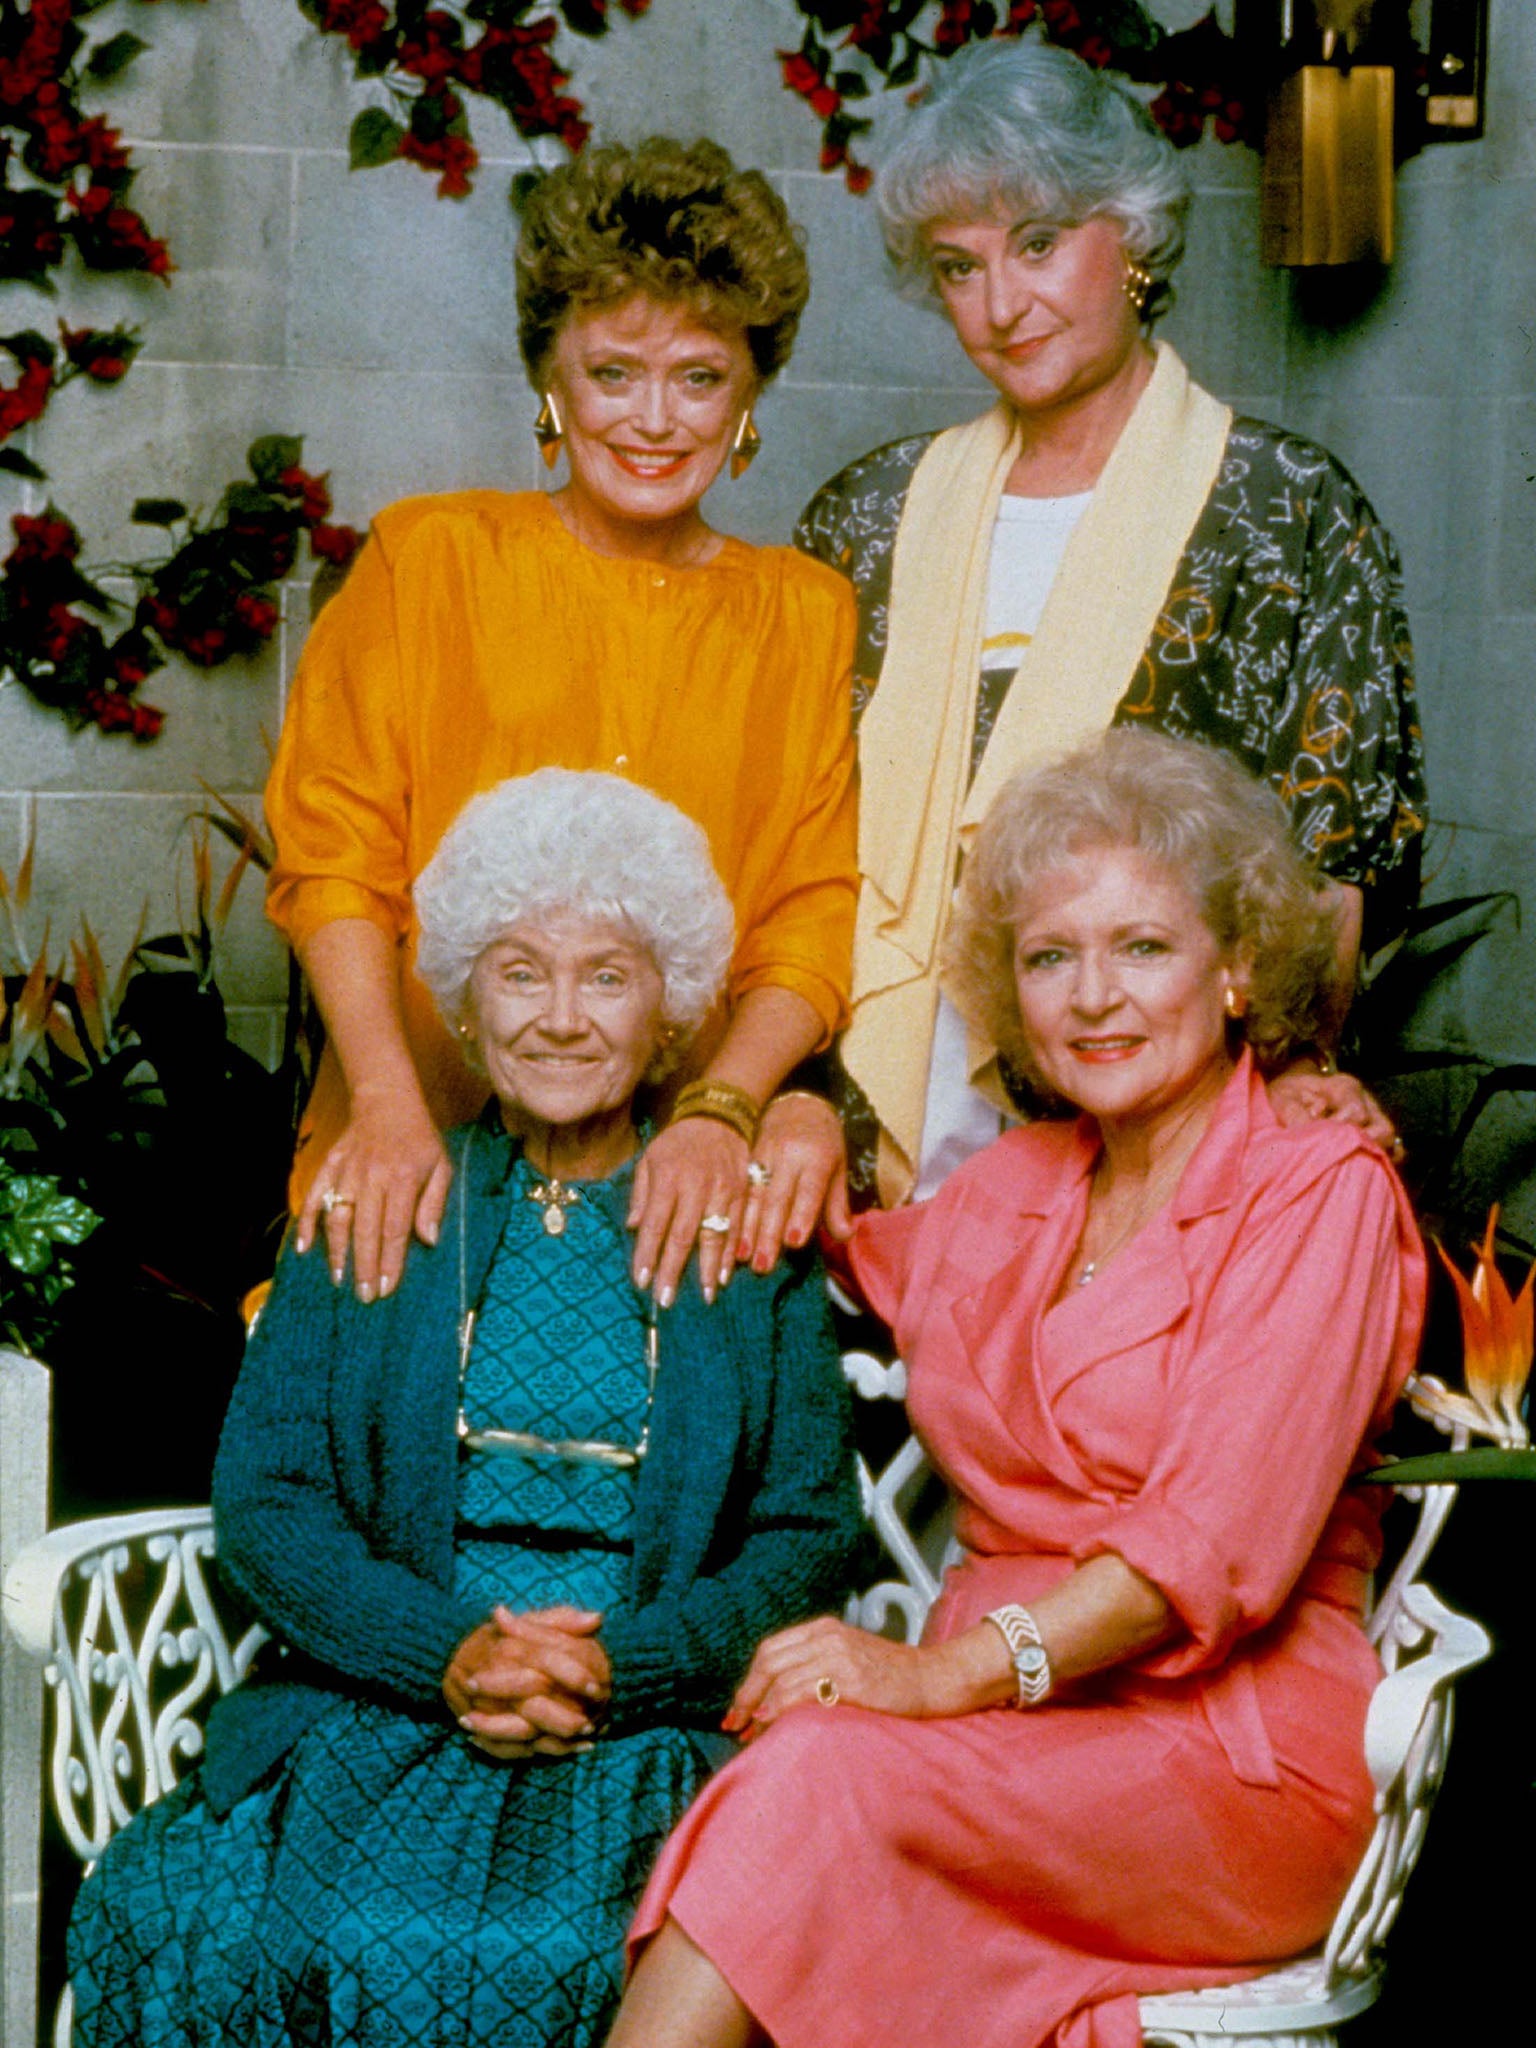 17. The Golden Girls tackle gay marriage (1991)